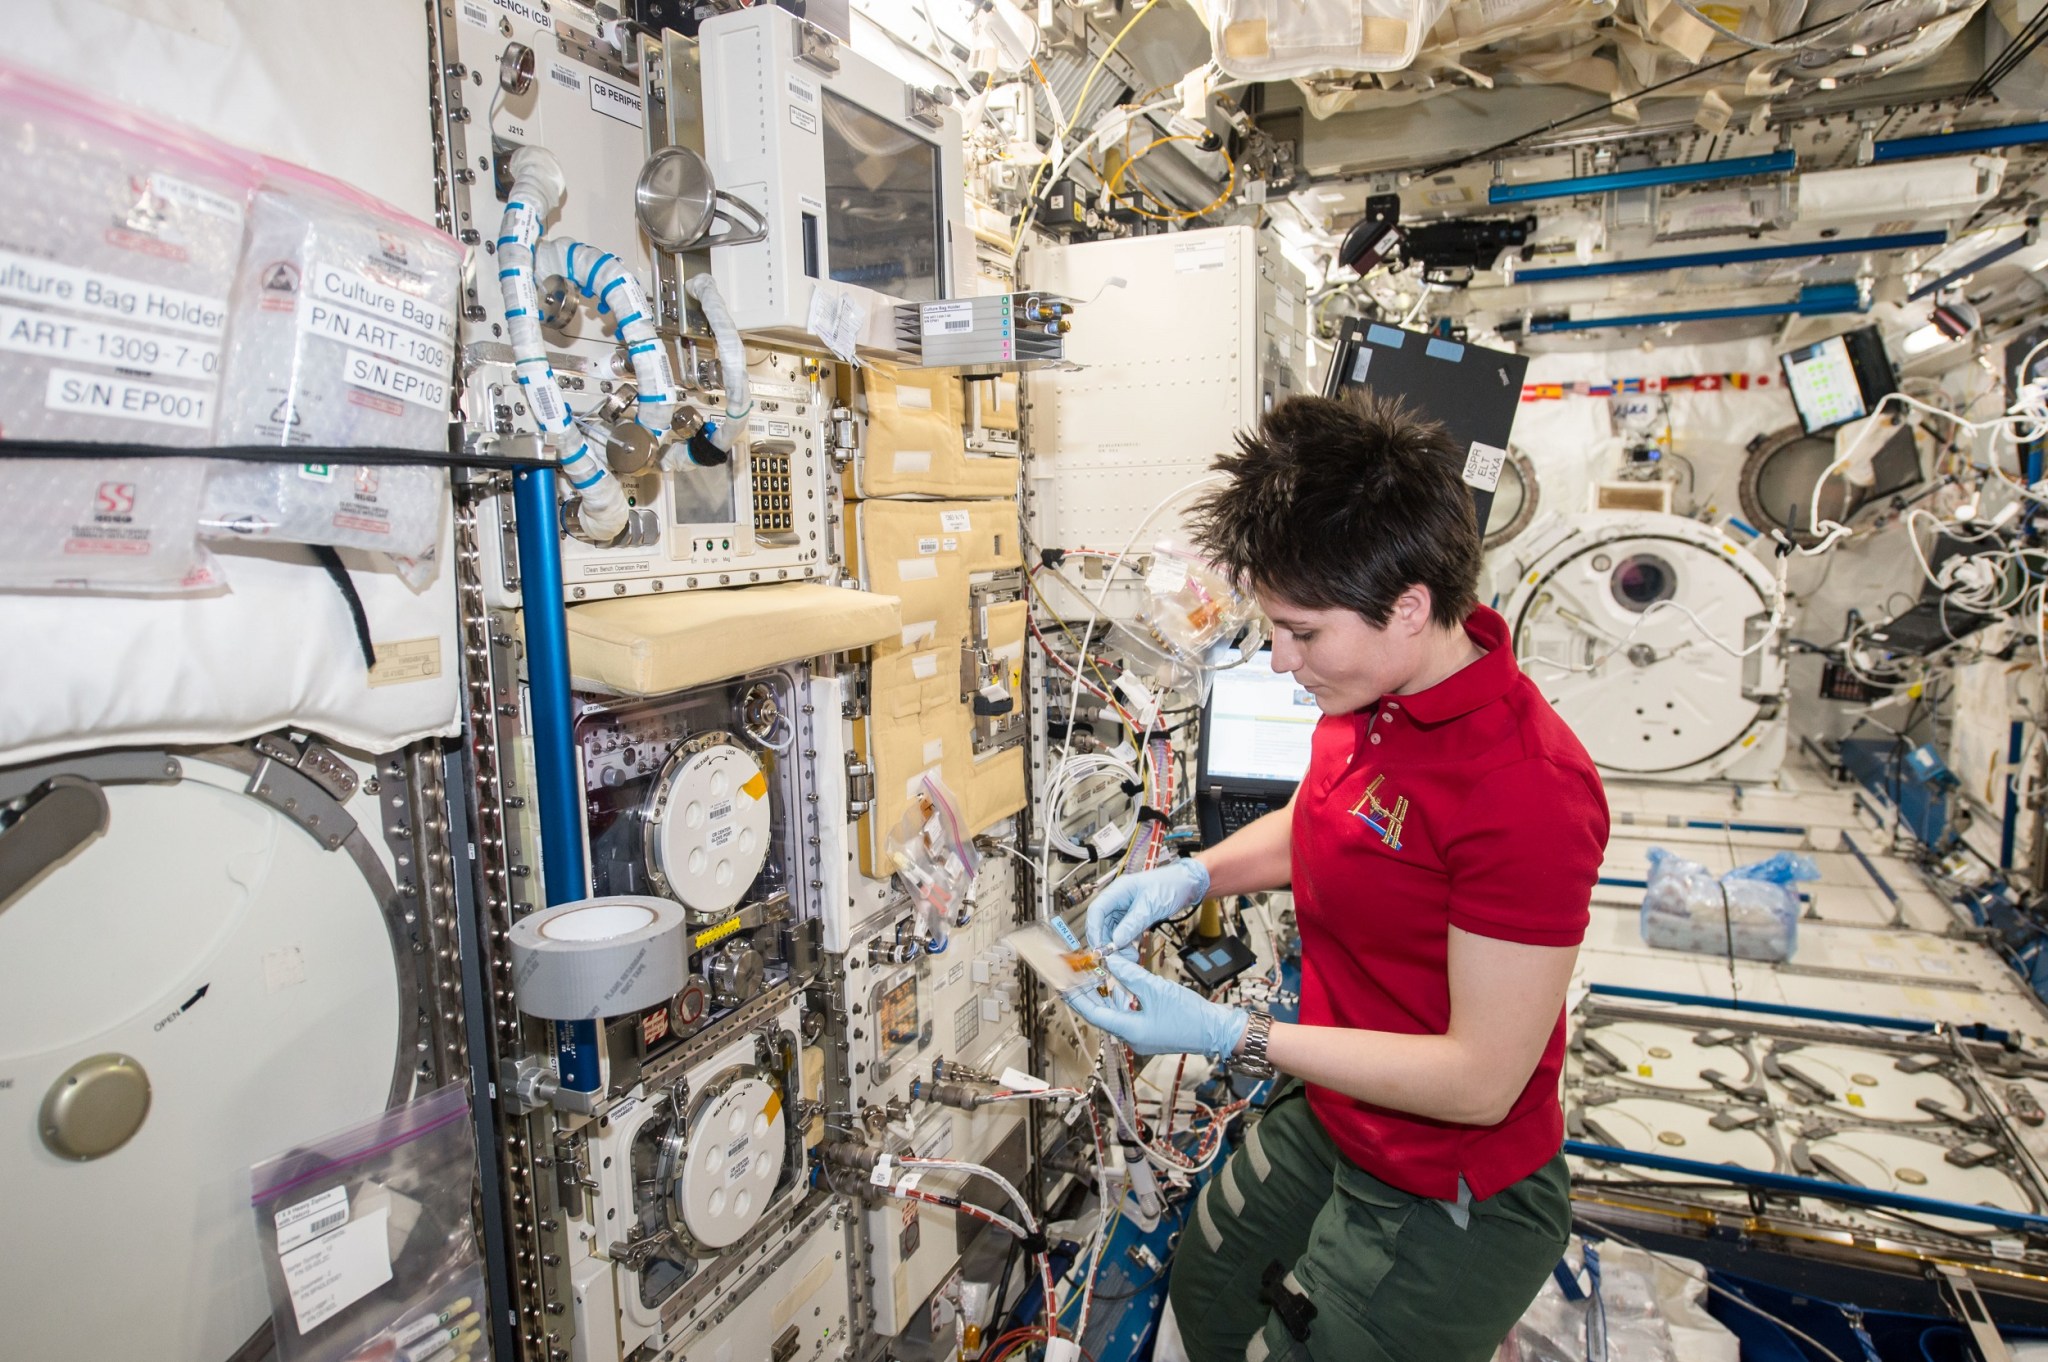 ESA astronaut Samantha Cristoforetti prepares samples for the Epigenetics experiment. Credits: NASA Alt text: Cristoforetti wears a red short-sleeved shirt, olive green pants, and light blue gloves. She is holding a plastic pouch connected by a tube to a panel on the wall of the space station that has multiple cords and displays. The walls around her other devices, cords, and screens.